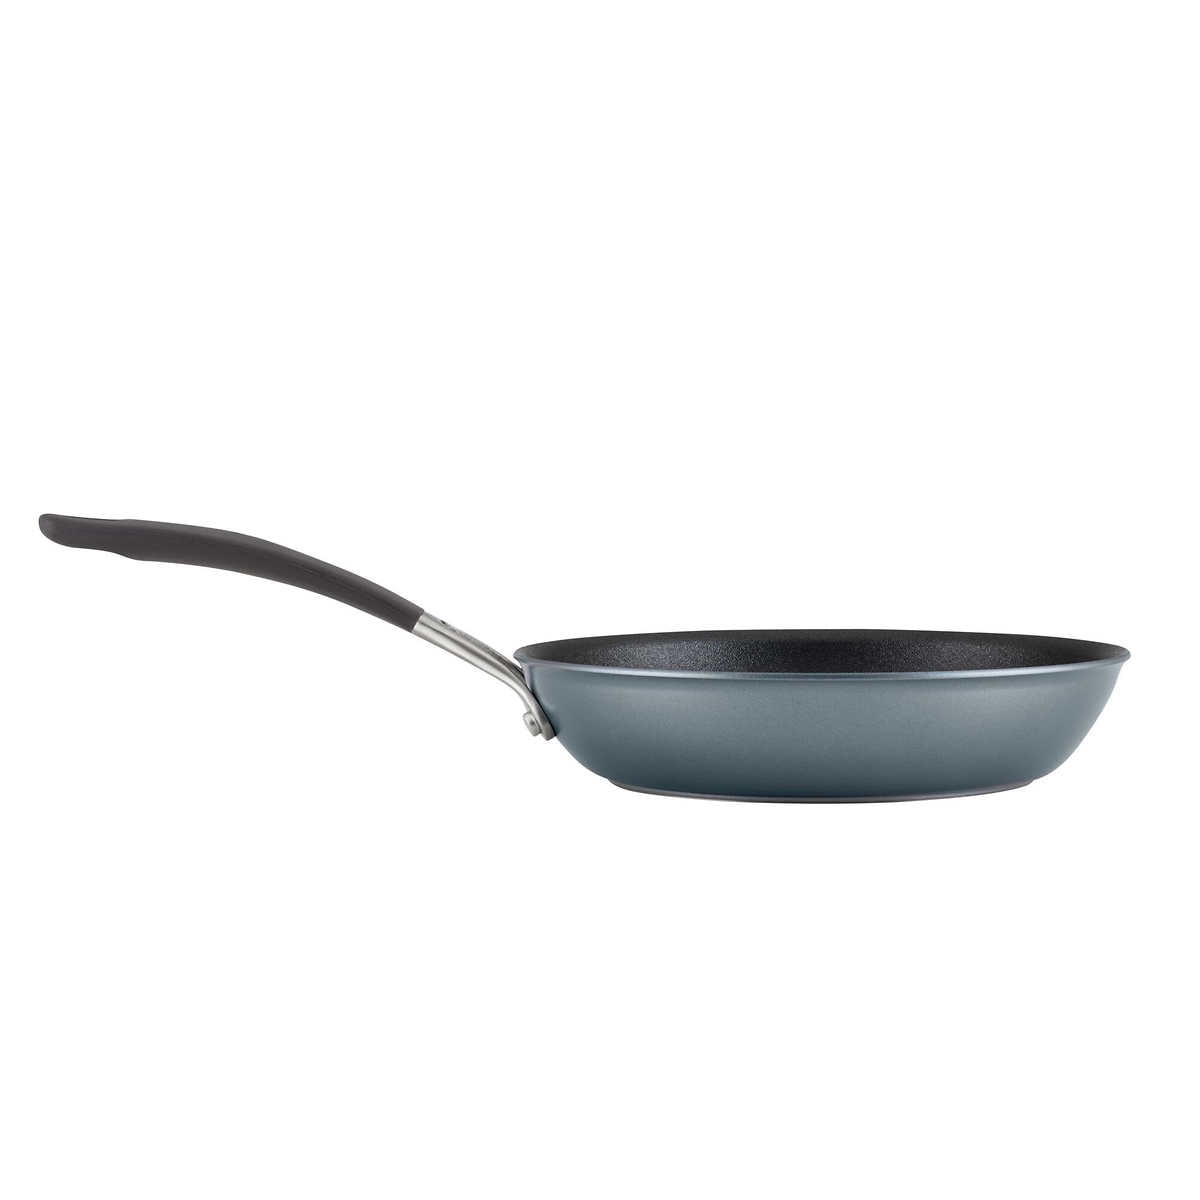 Circulon A1 Series ScratchDefense Nonstick Induction Straining Sauce Pan with Lid, 3qt, Graphite